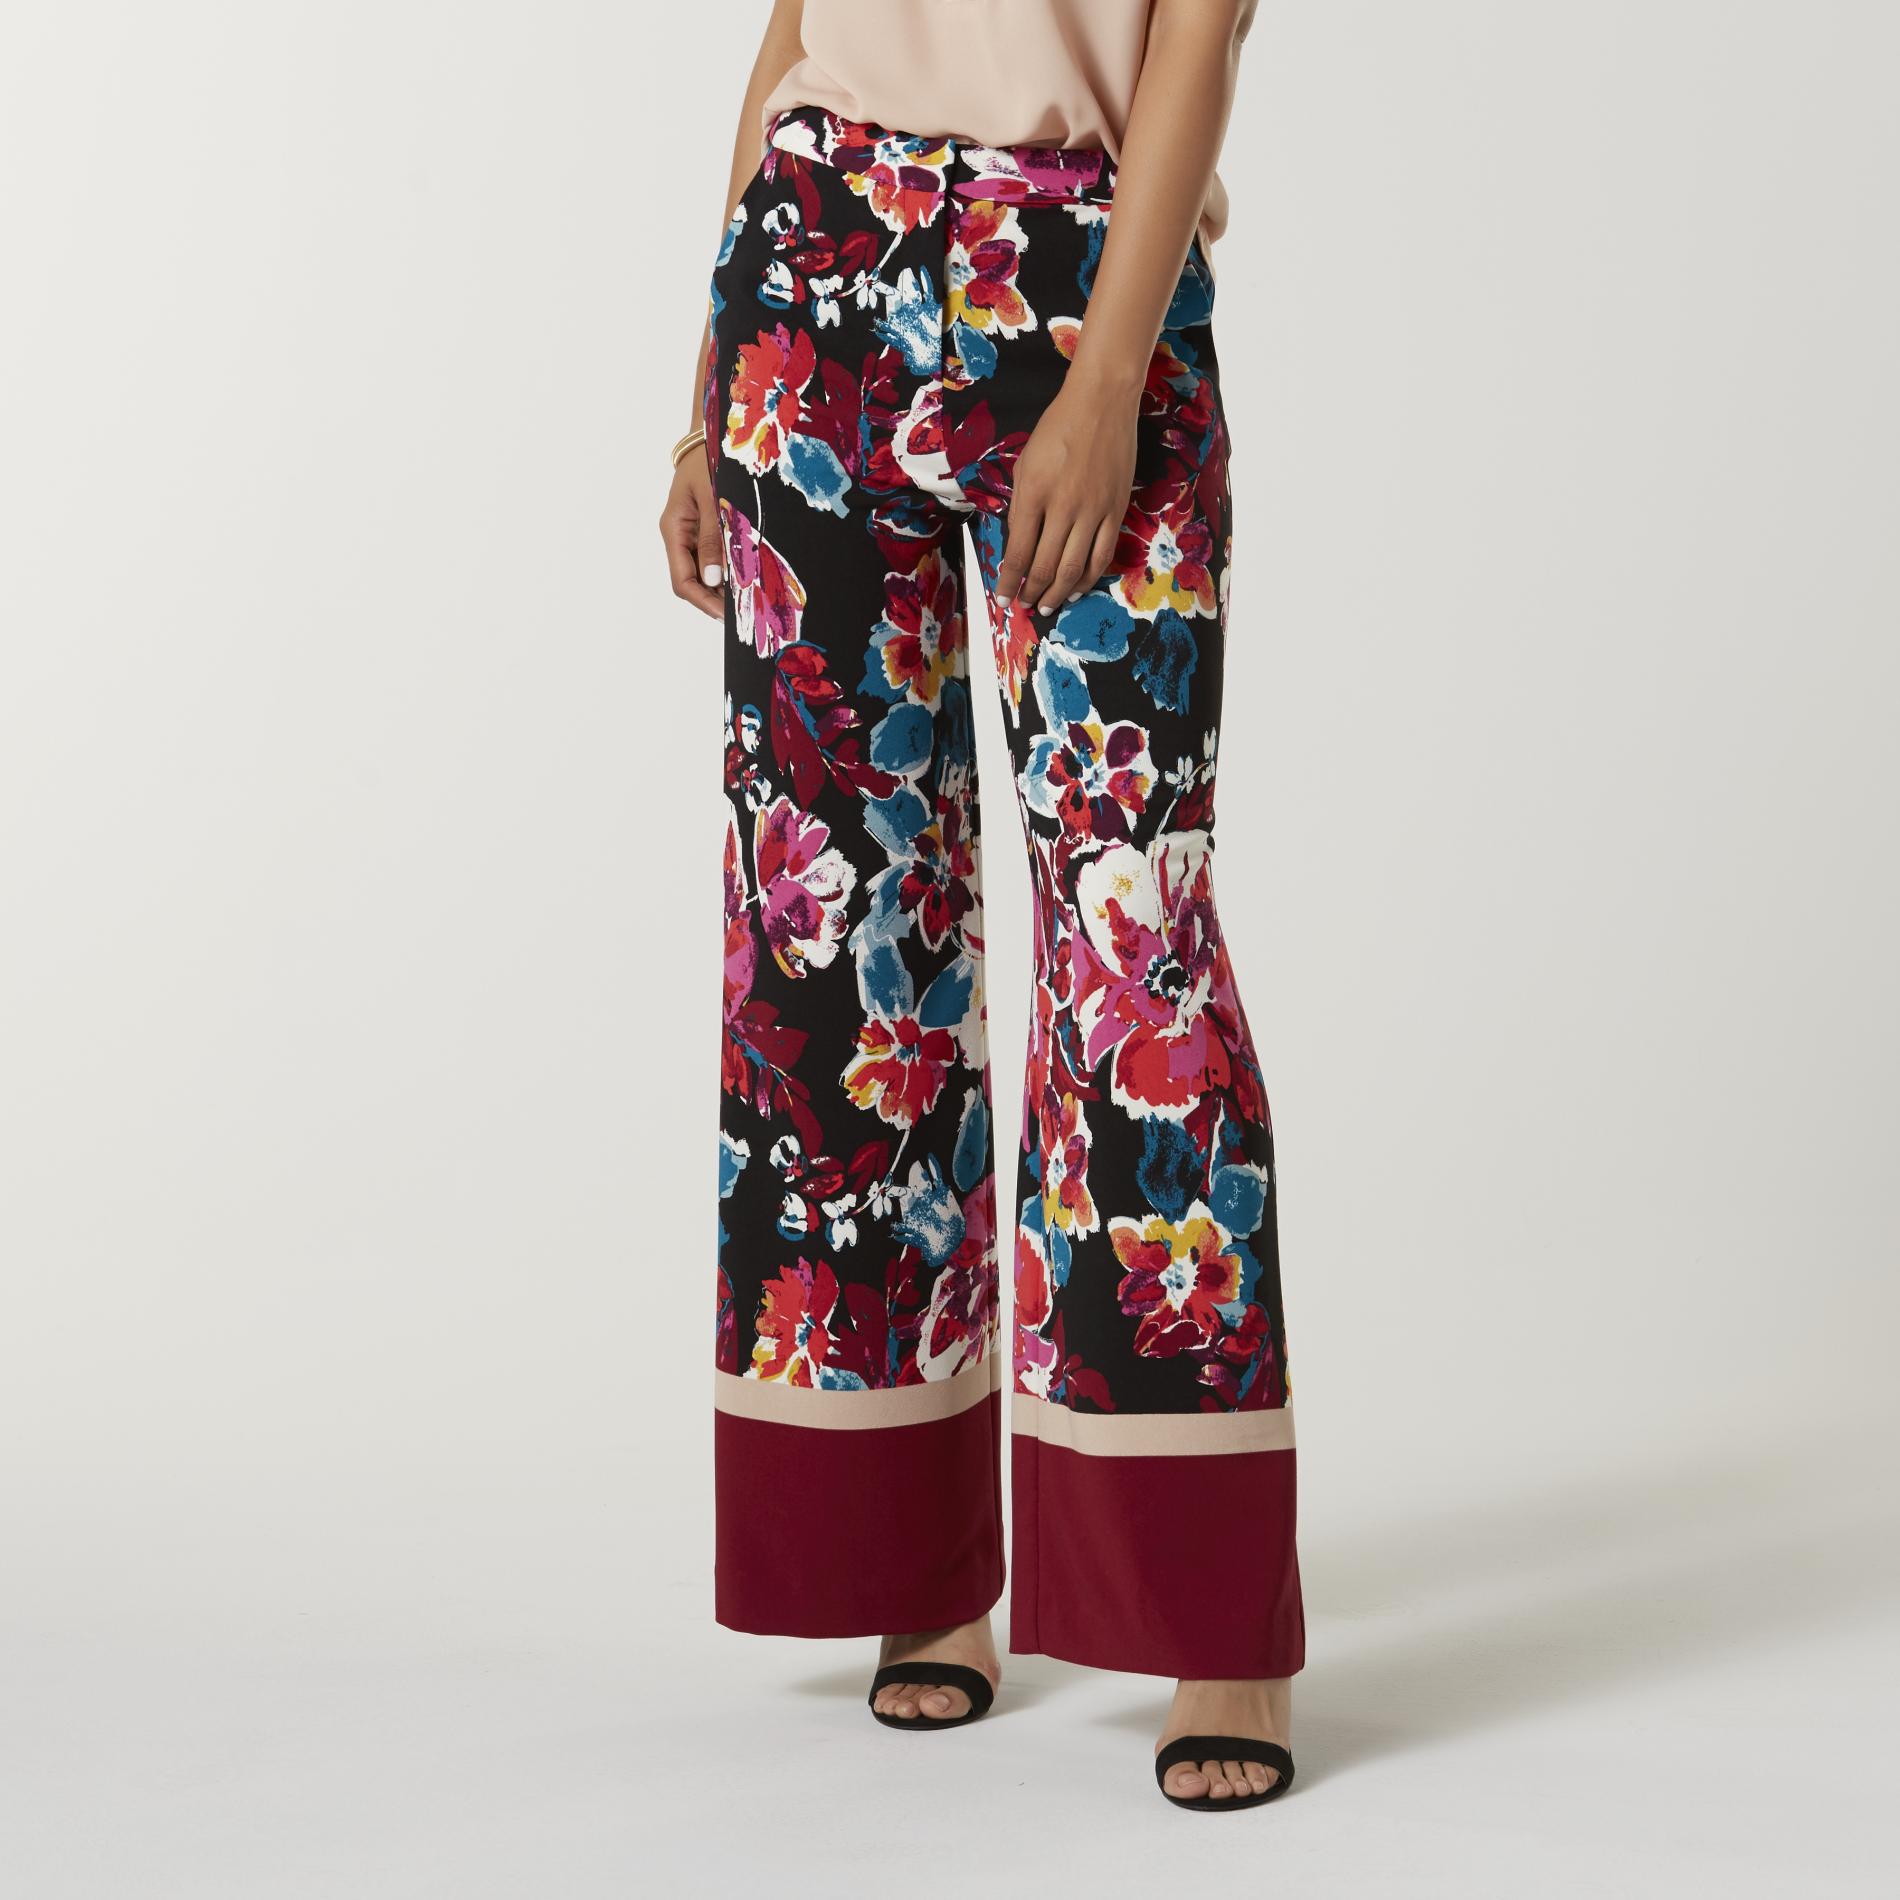 Simply Styled Women's Wide Leg Pants - Floral